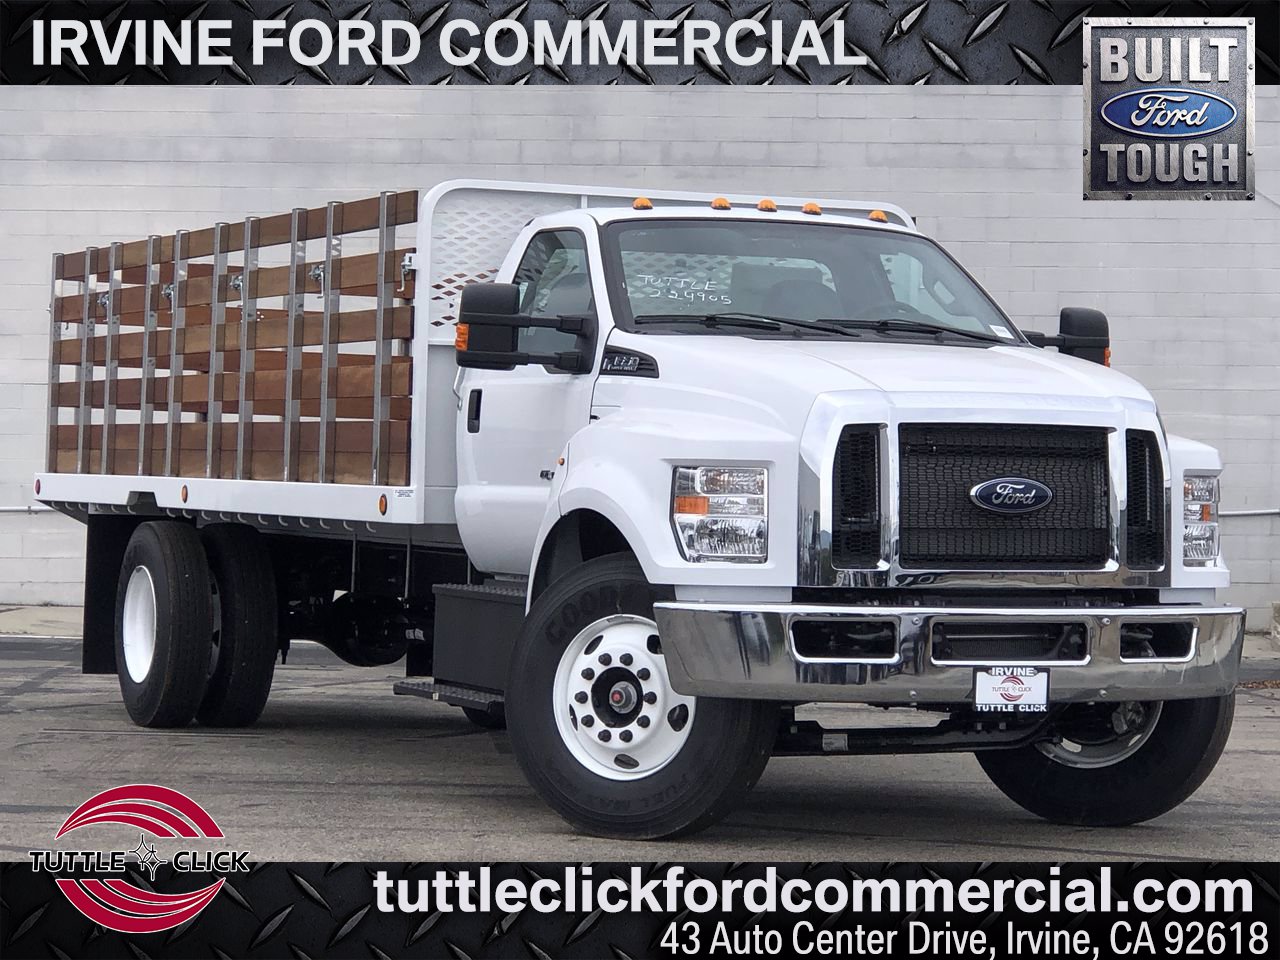 New 2022 FORD TRUCK S-DTY F-650 F-650 ...